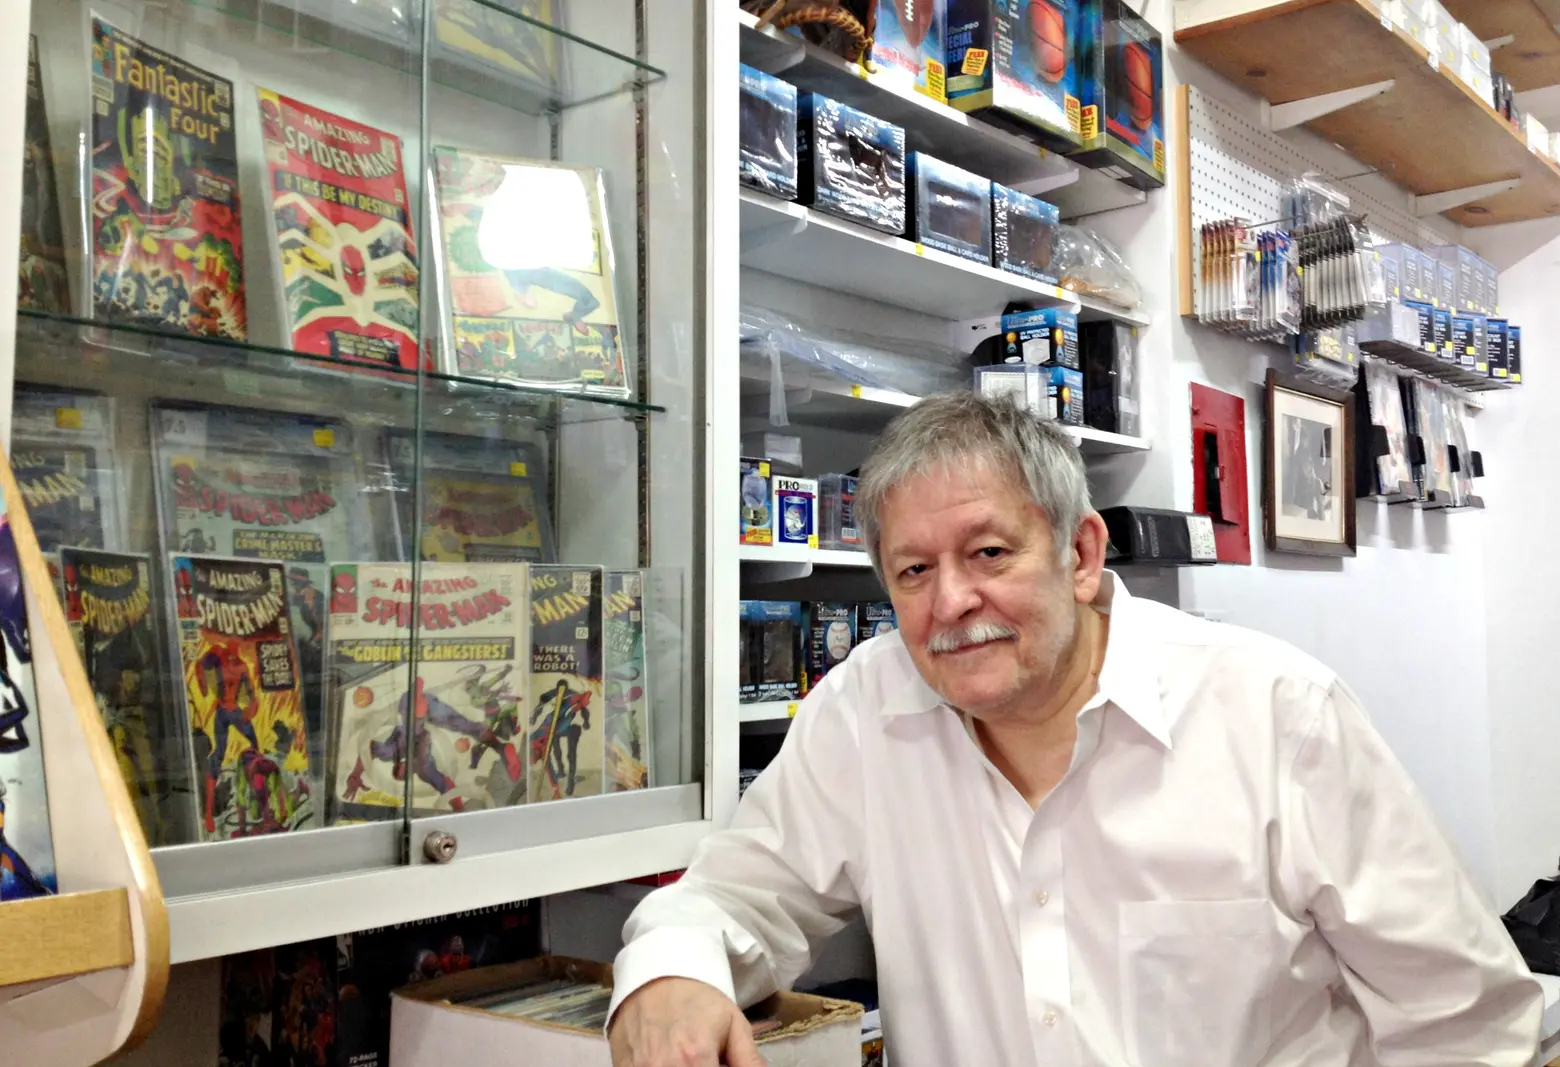 Alex's MVP, Alex Gregg, NYC comic book stores, NYC sports card stores, Yorkville businesses